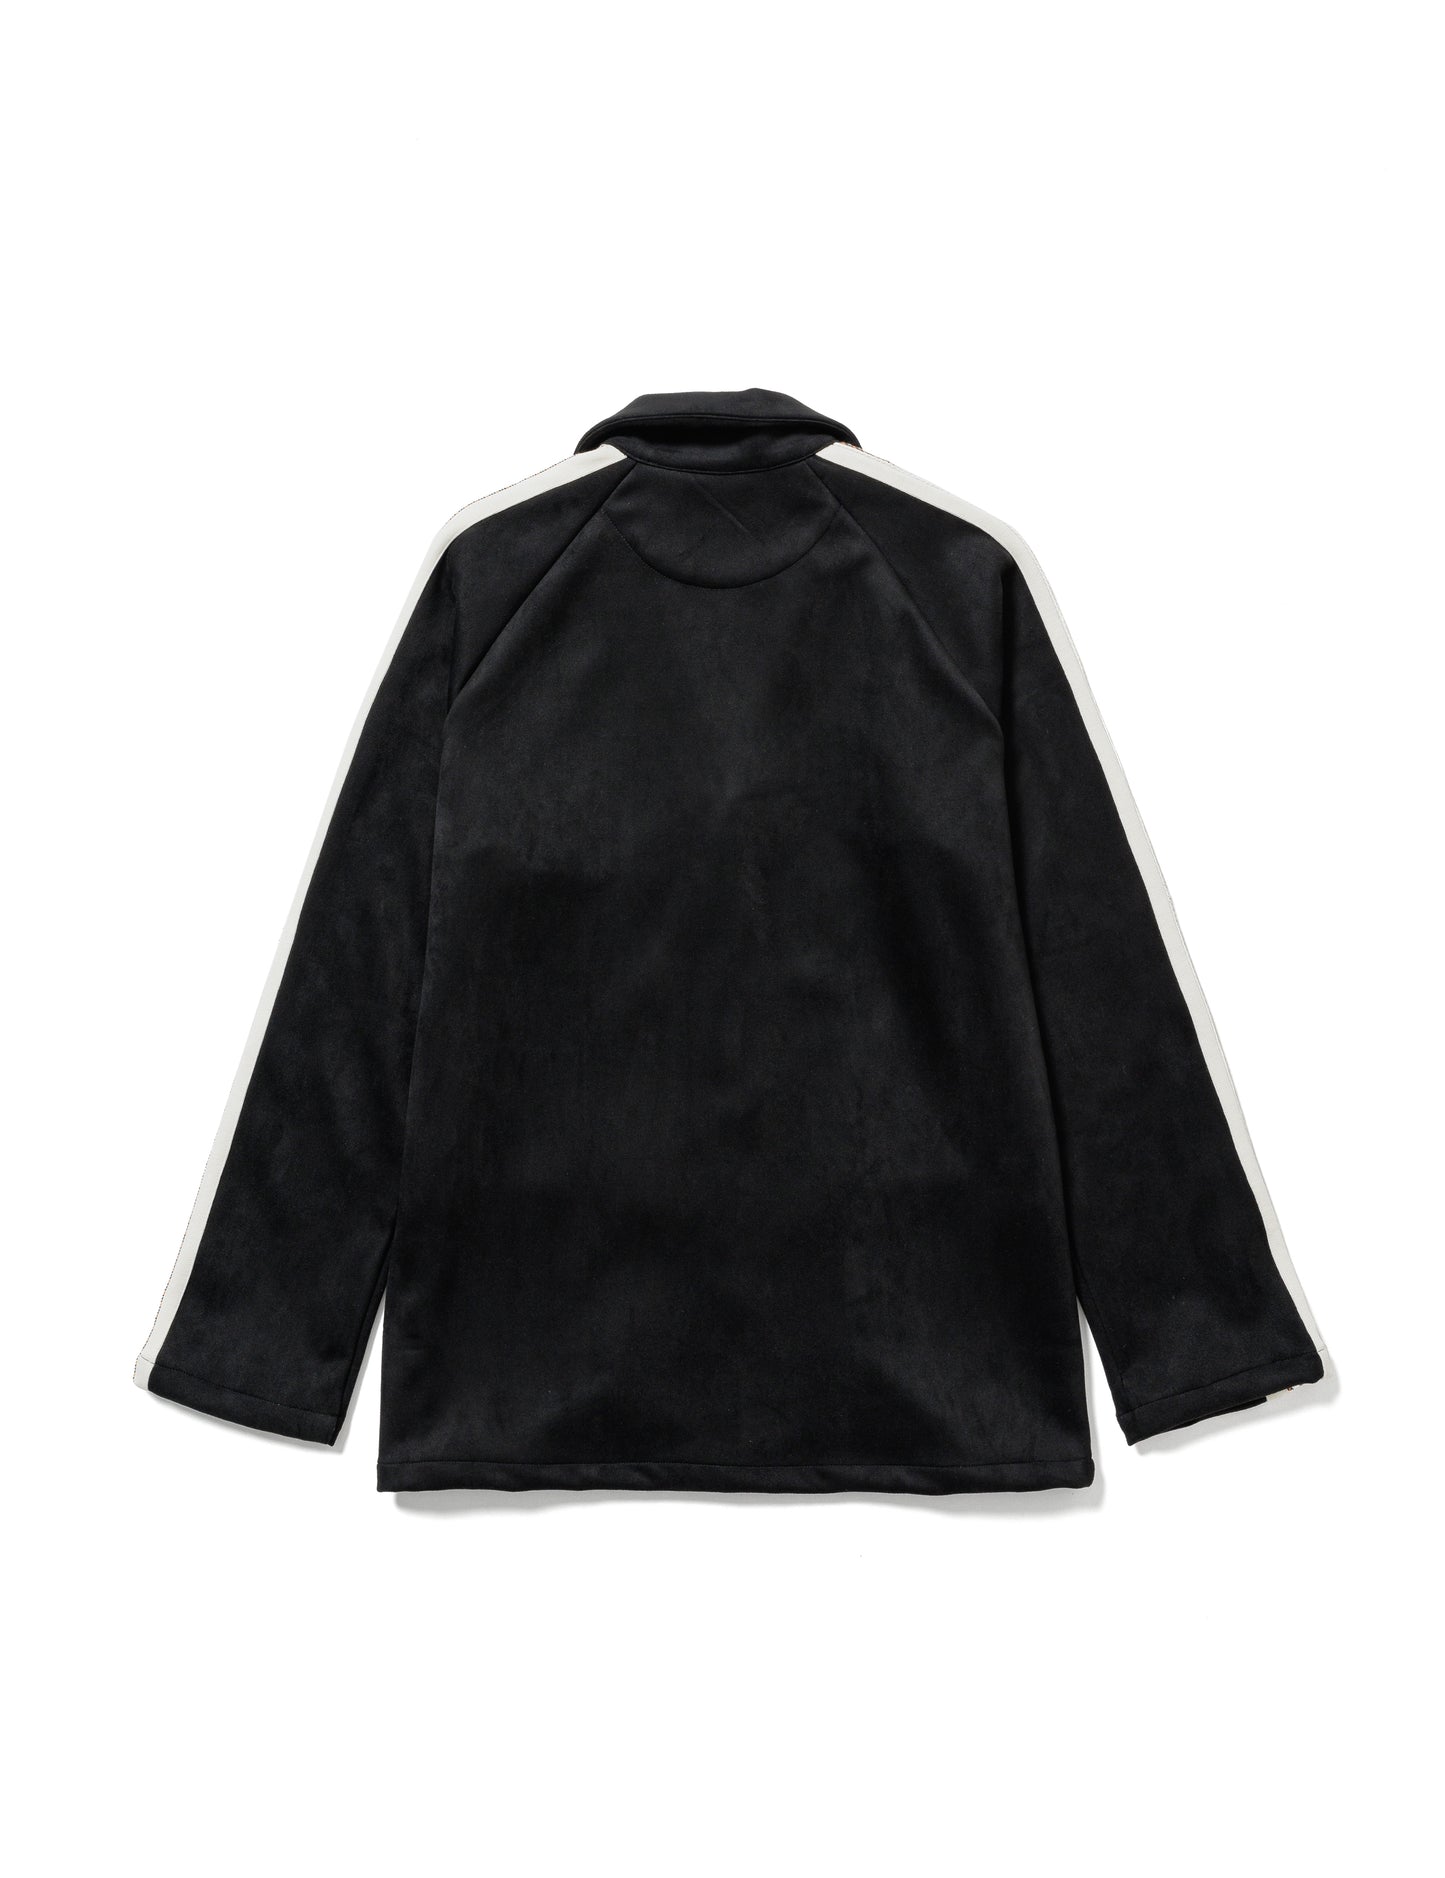 23AW-CSS-007 / FAUX SUEDE TRACK LAPEL JACKET / BLACK